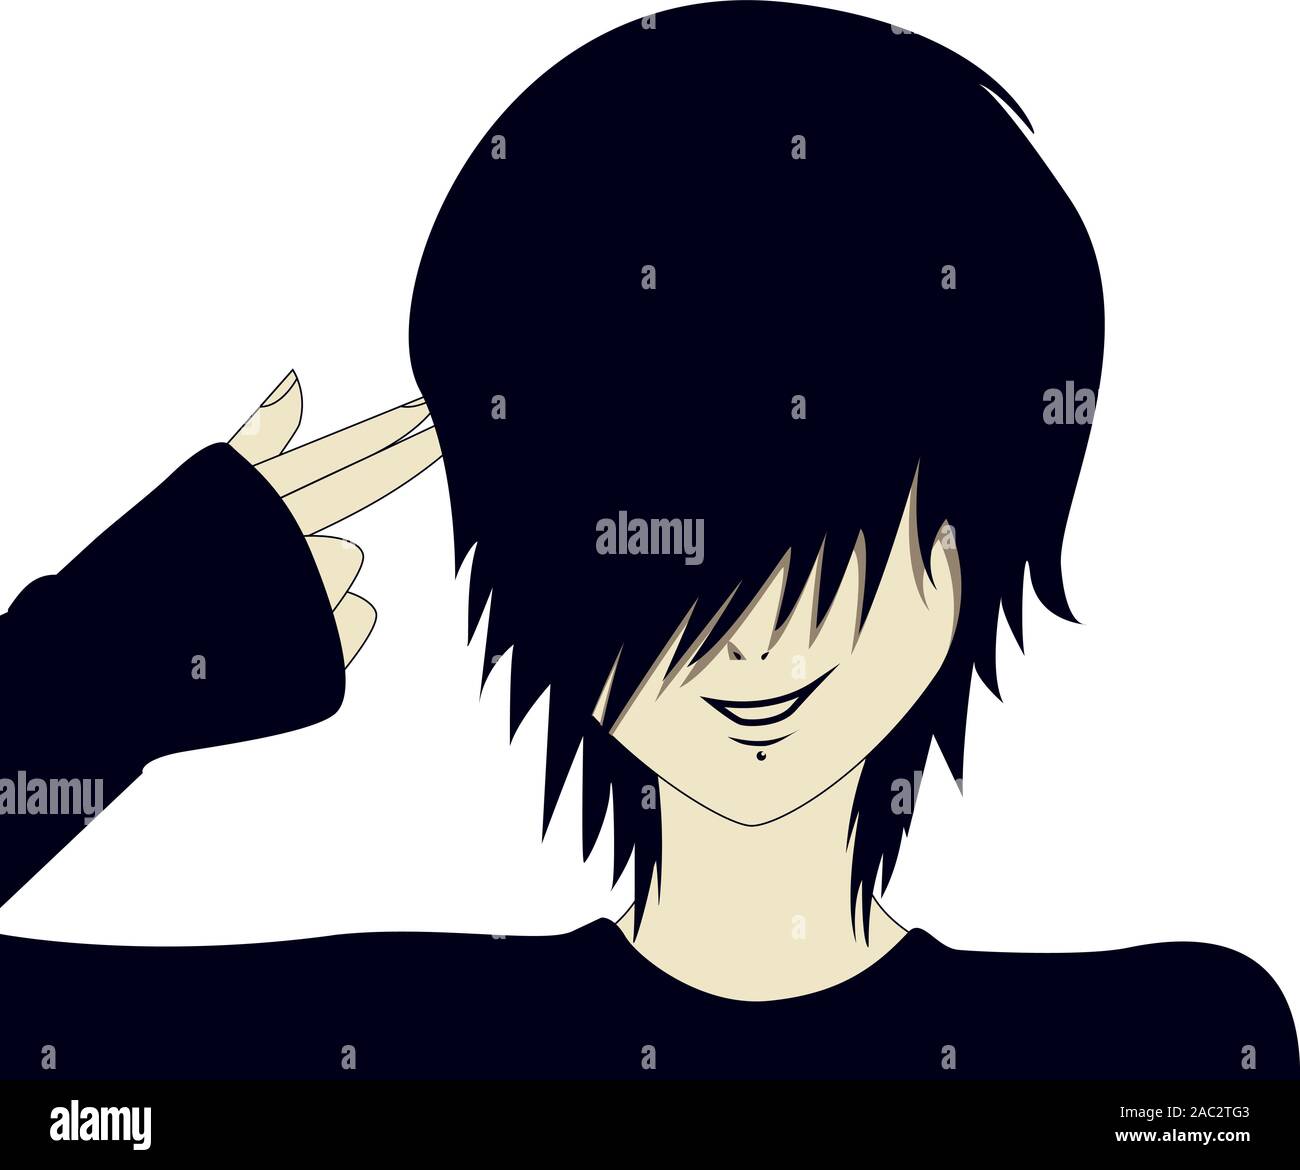 A young emo kid with hand shaped like a gun. Stock Vector